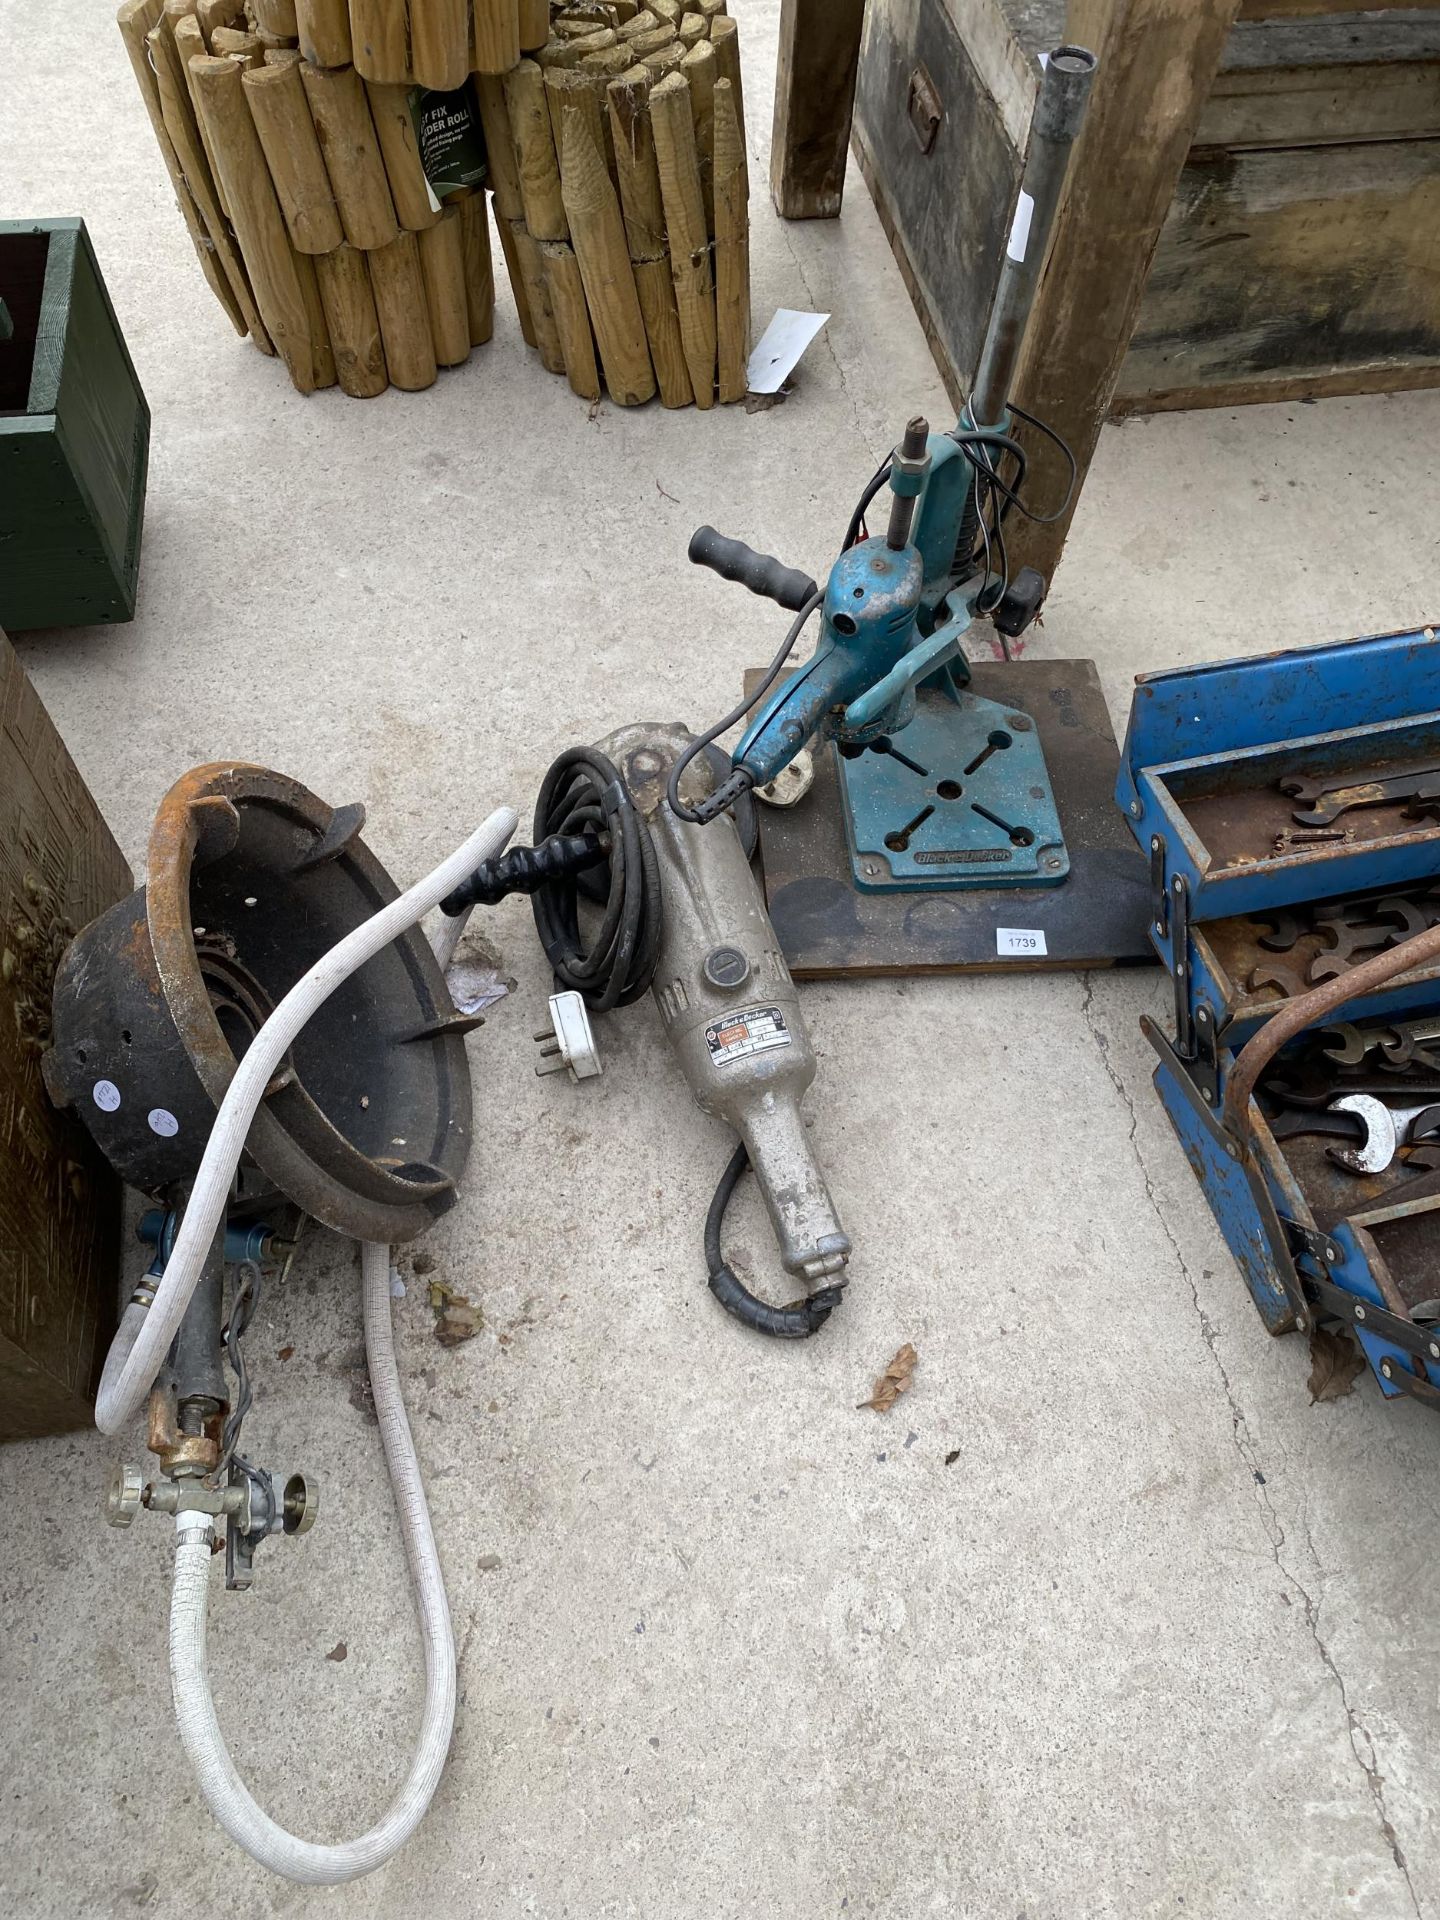 A BLACK AND DECKER DRILL AND DRILL STAND AND A BLACK AND DECKER GRINDER